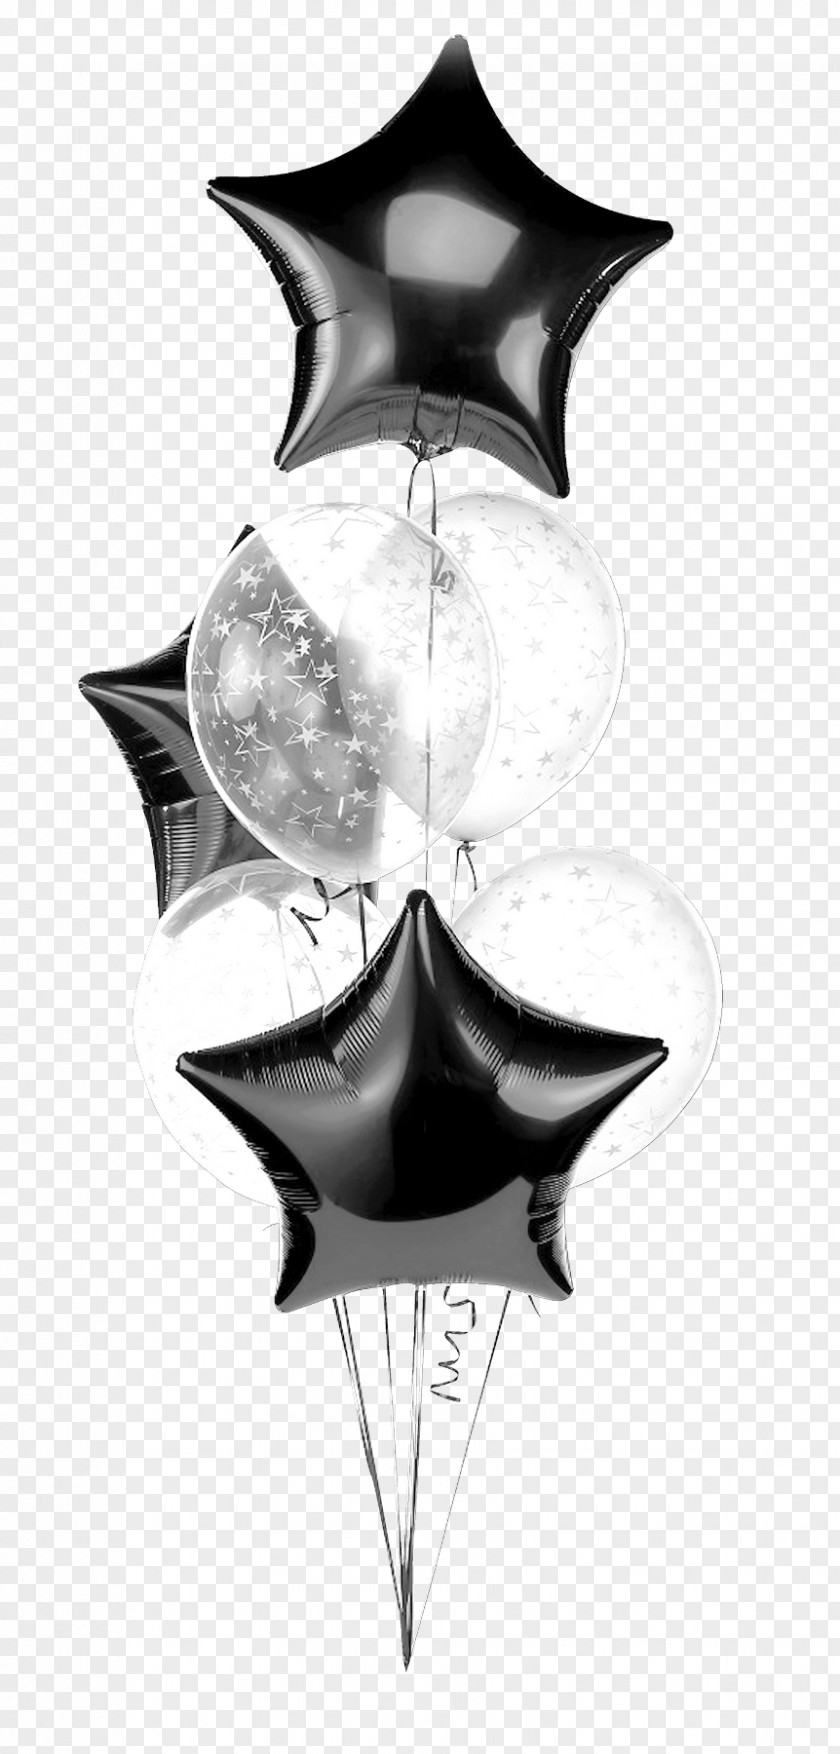 Beautiful Five-pointed Star Balloon London Borough Of Wandsworth Bouquets Gas Flower Bouquet PNG